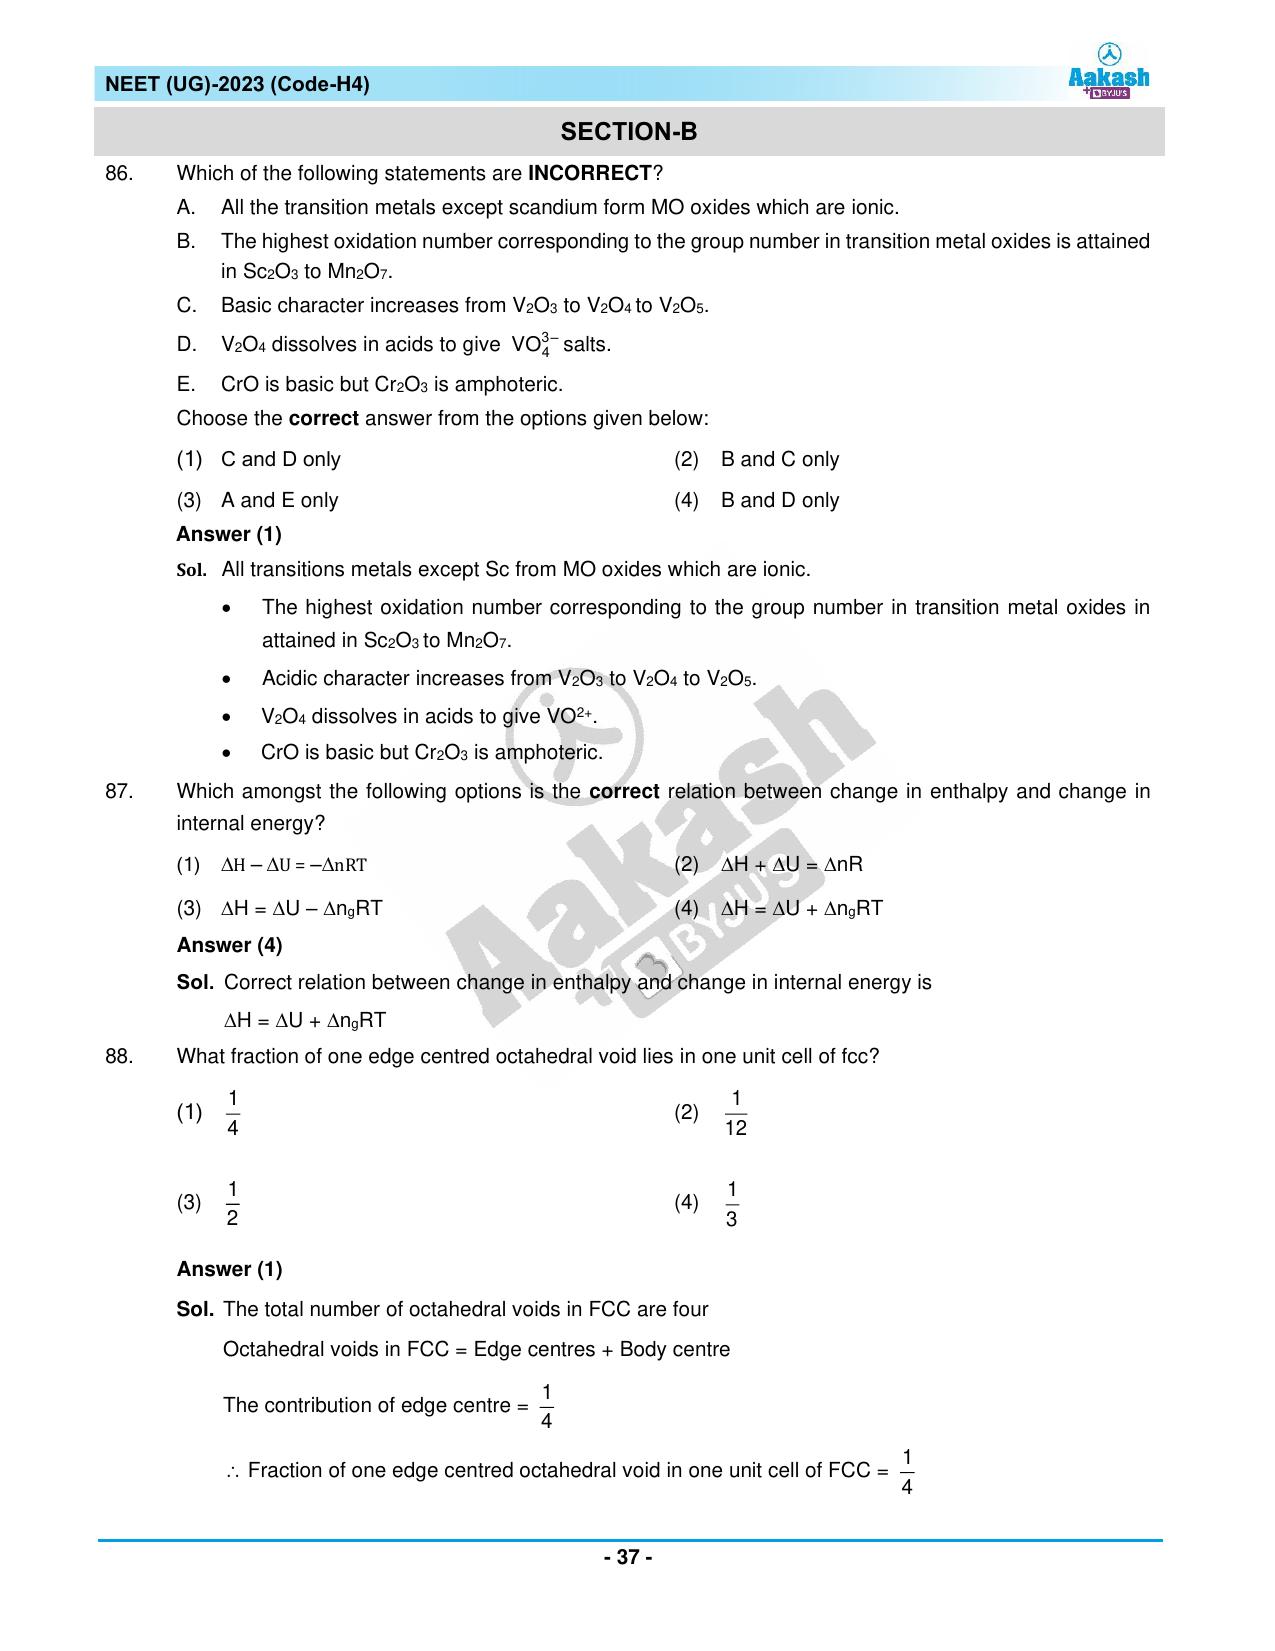 NEET 2023 Question Paper H4 - Page 37